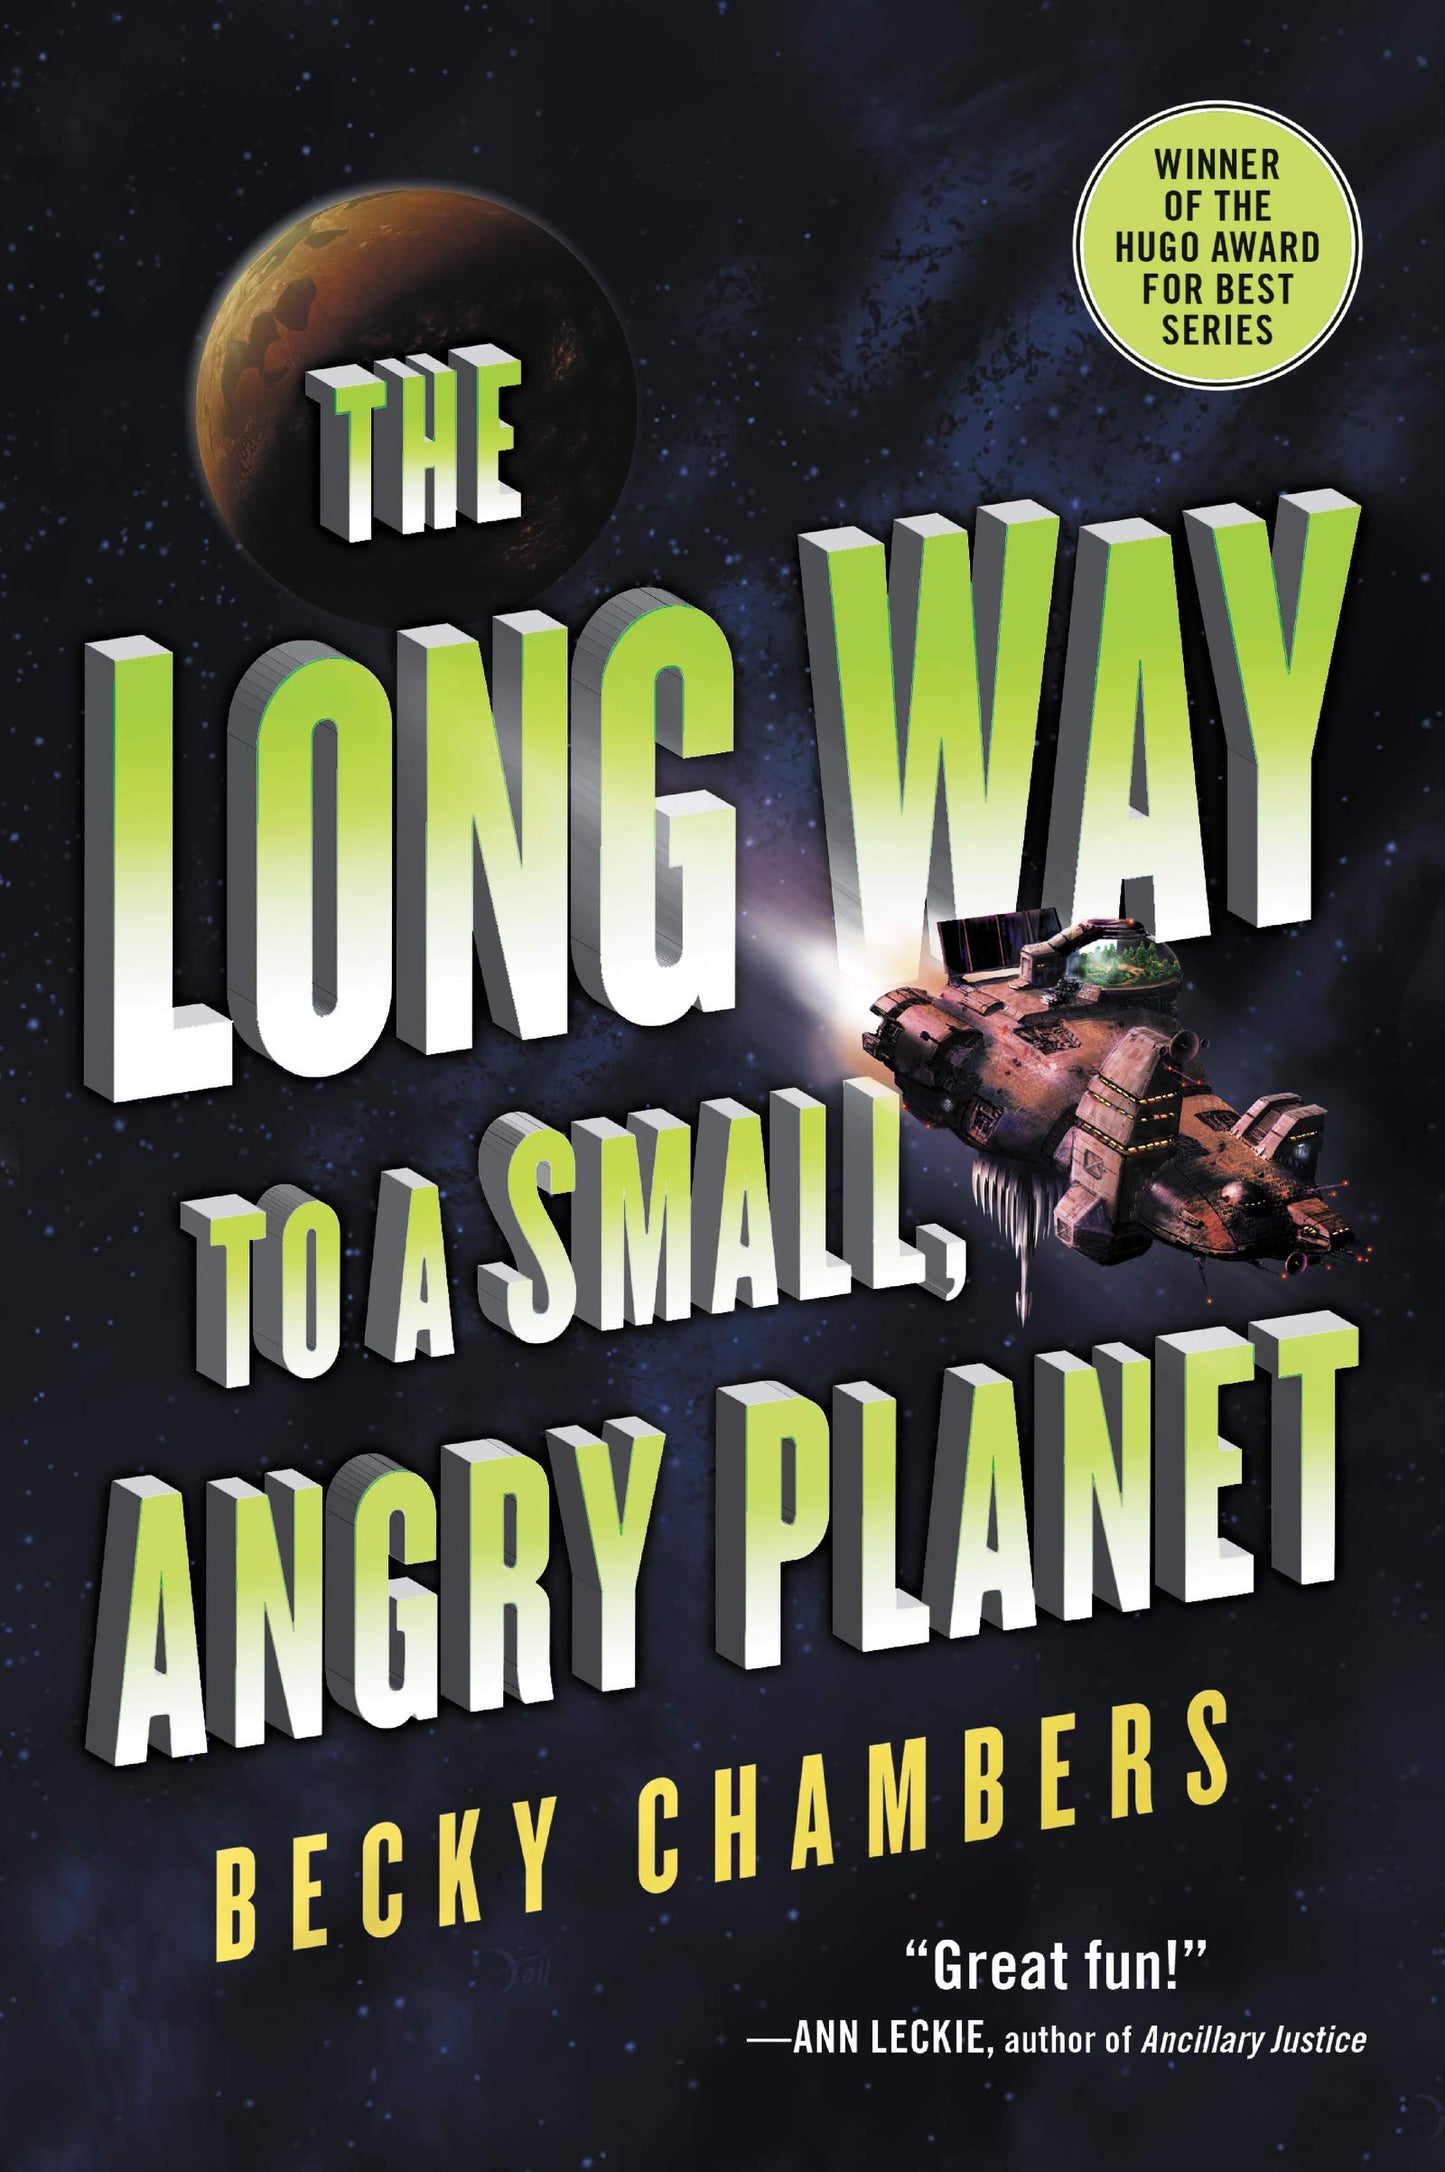 The Long Way to a Small, Angry Planet, by Becky Chambers